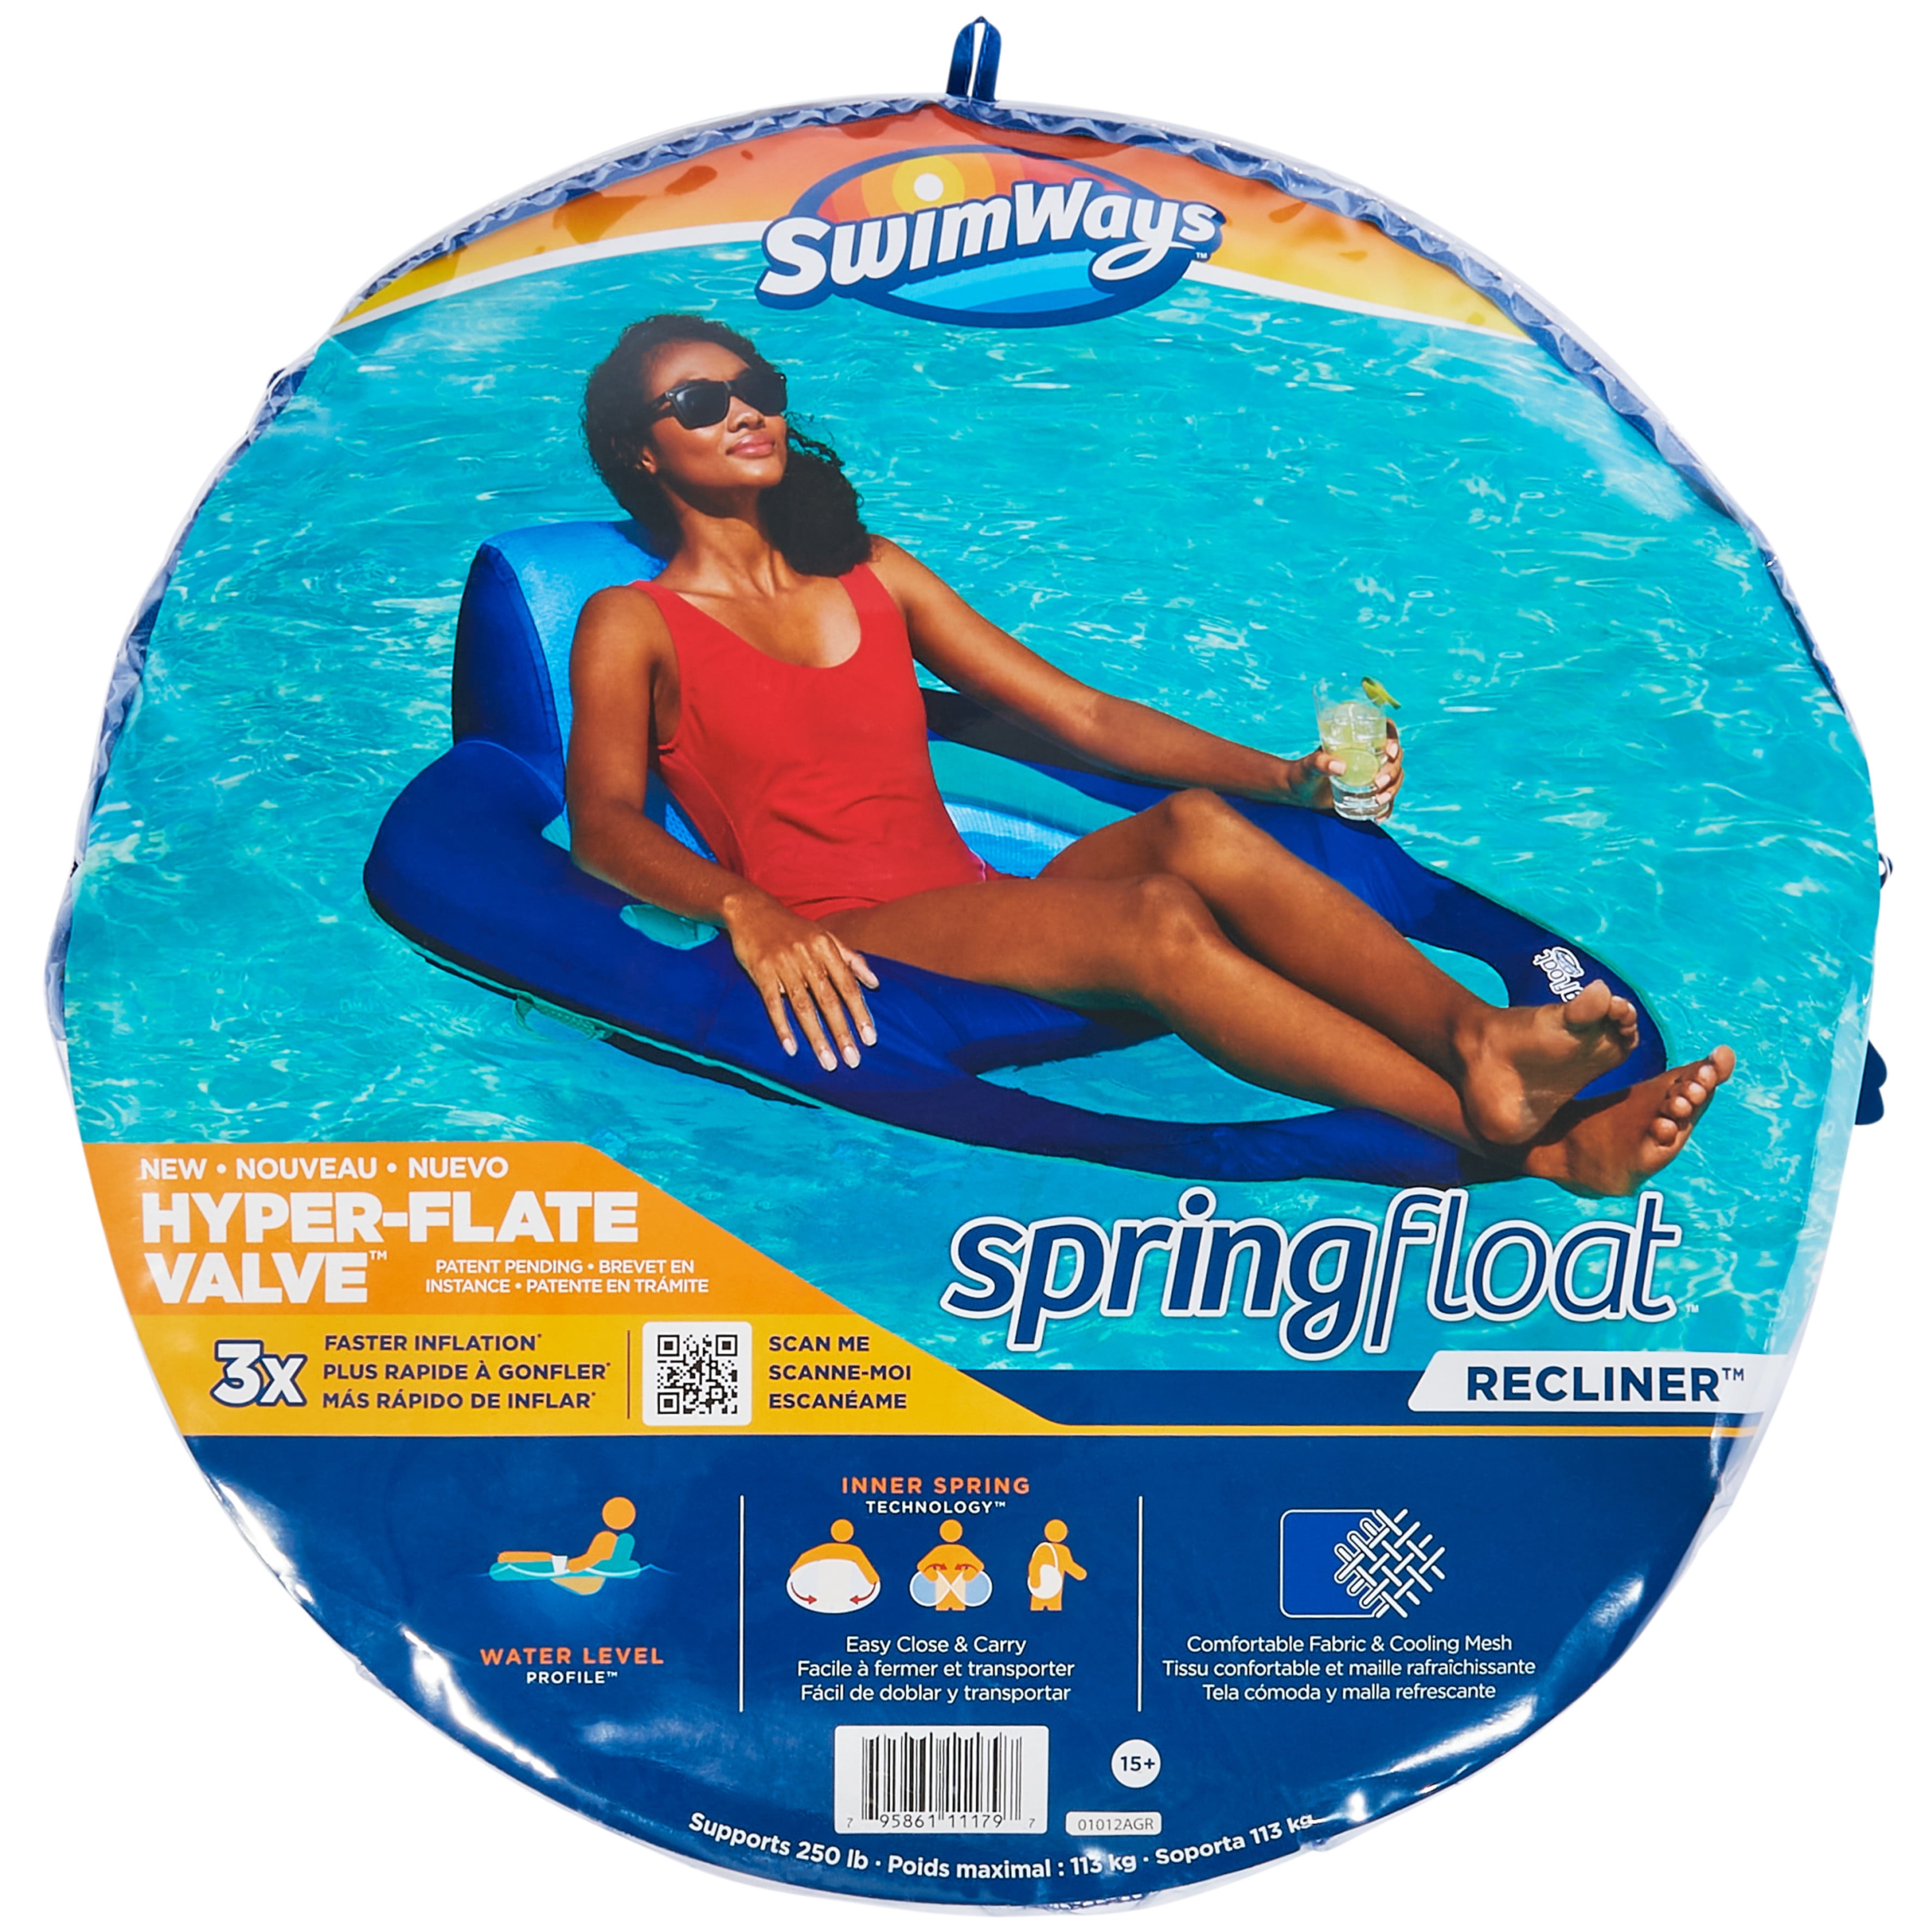 SwimWays Spring Float Inflatable Pool Lounger with Hyper-Flate Valve Blue